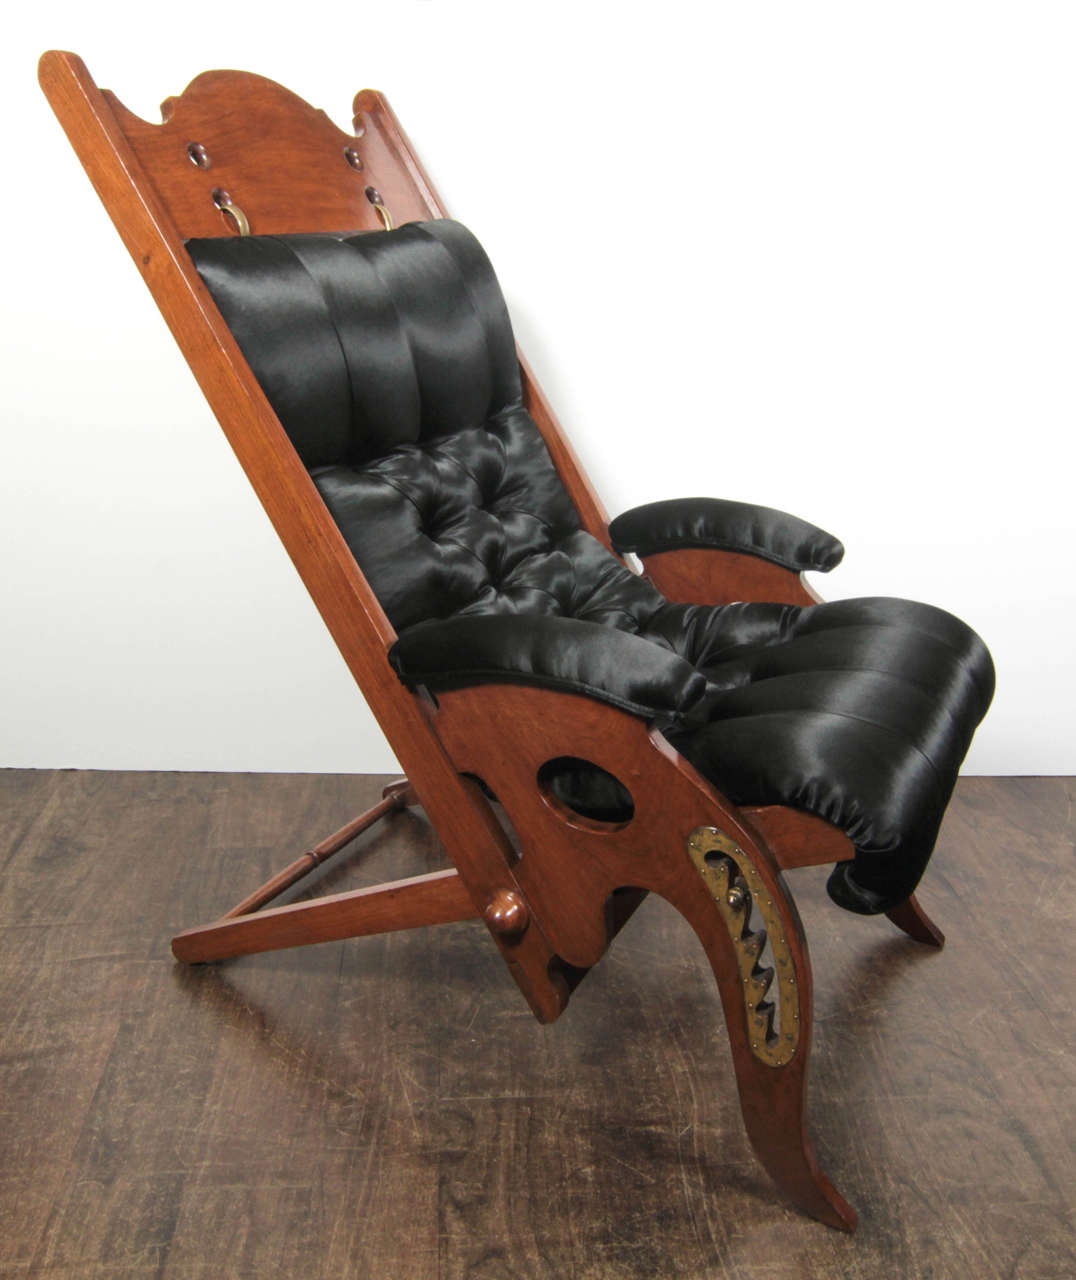 An Edwardian-style deckchair for a yacht in mahogany and brass with buttoned upholstery. The chair was one of several made in France for the Paris decorator, furniture designer, and antiques dealer Jean-Pierre Hagnauer, who sold a pair to Arturo